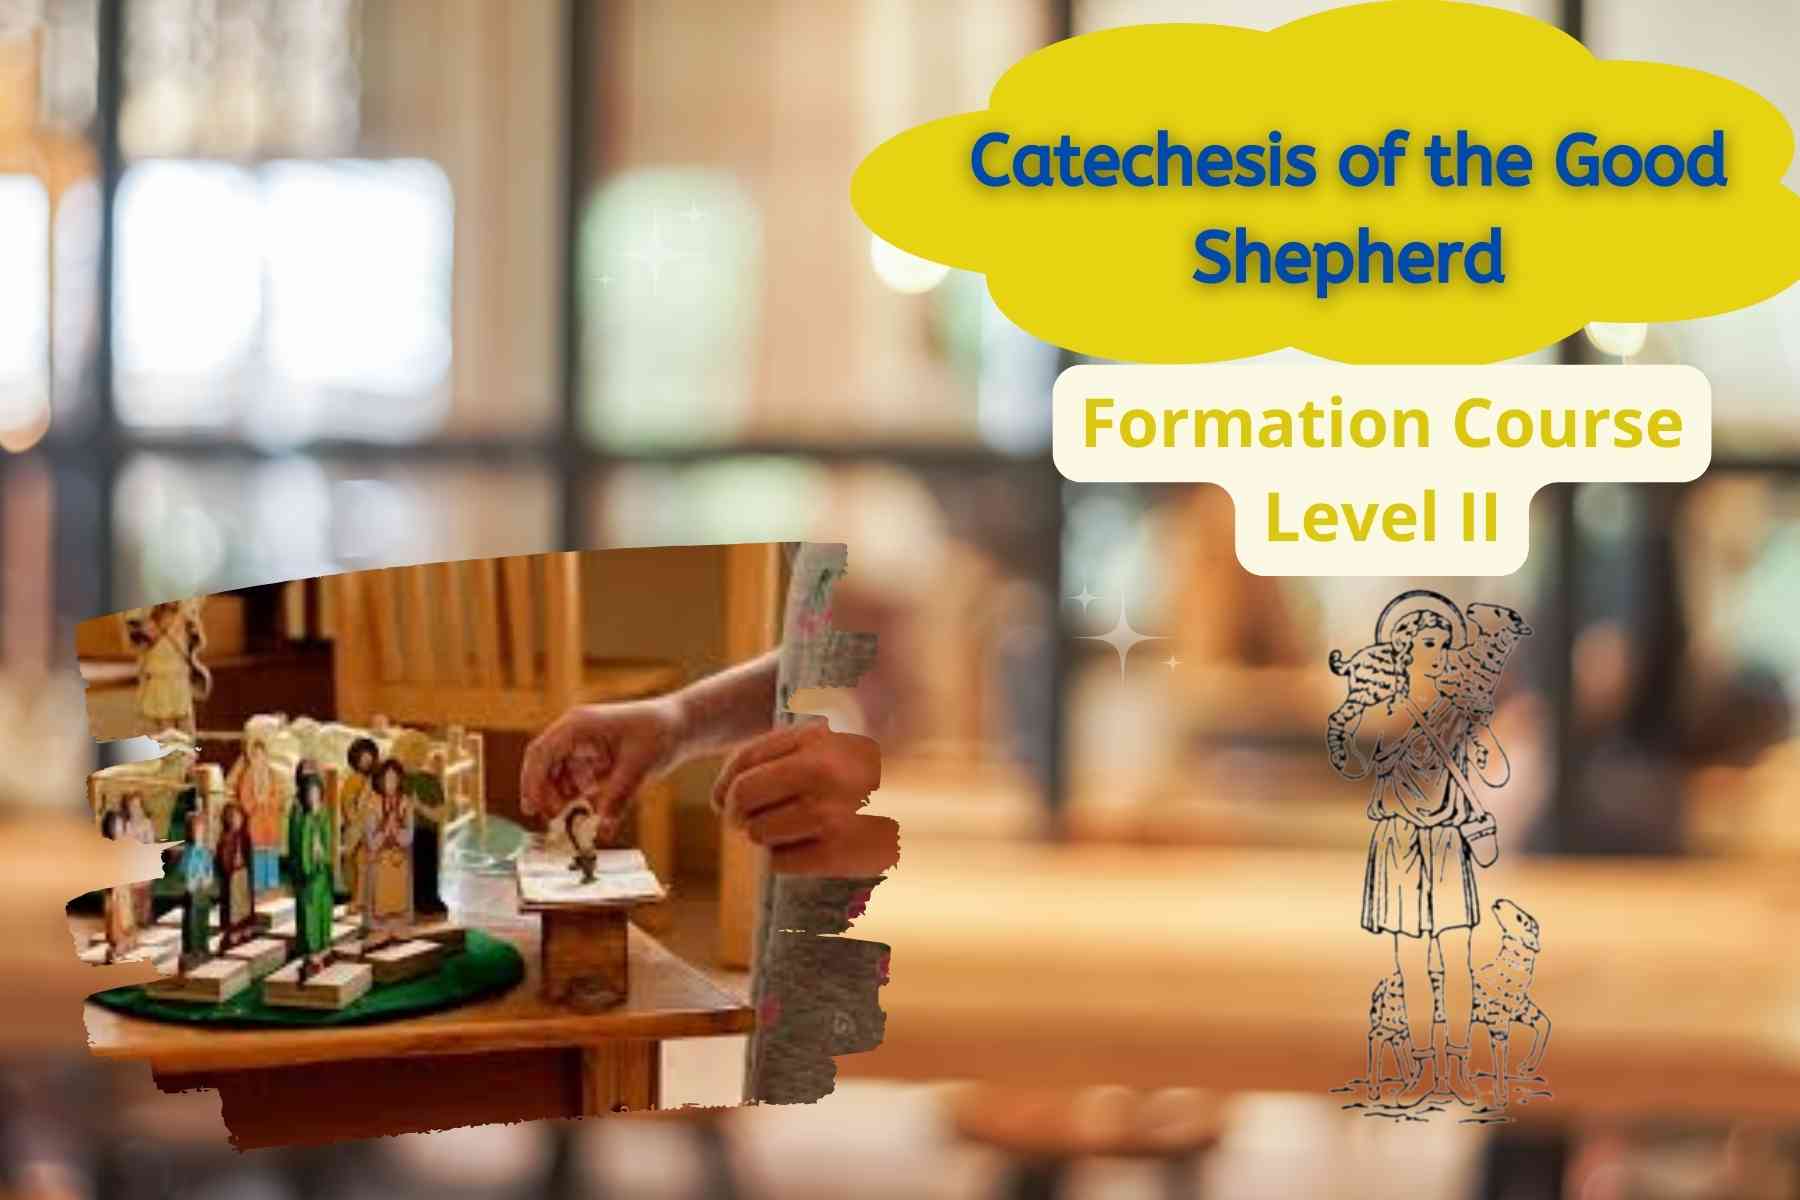 Catechesis of the Good Shepherd Formation Course Level II